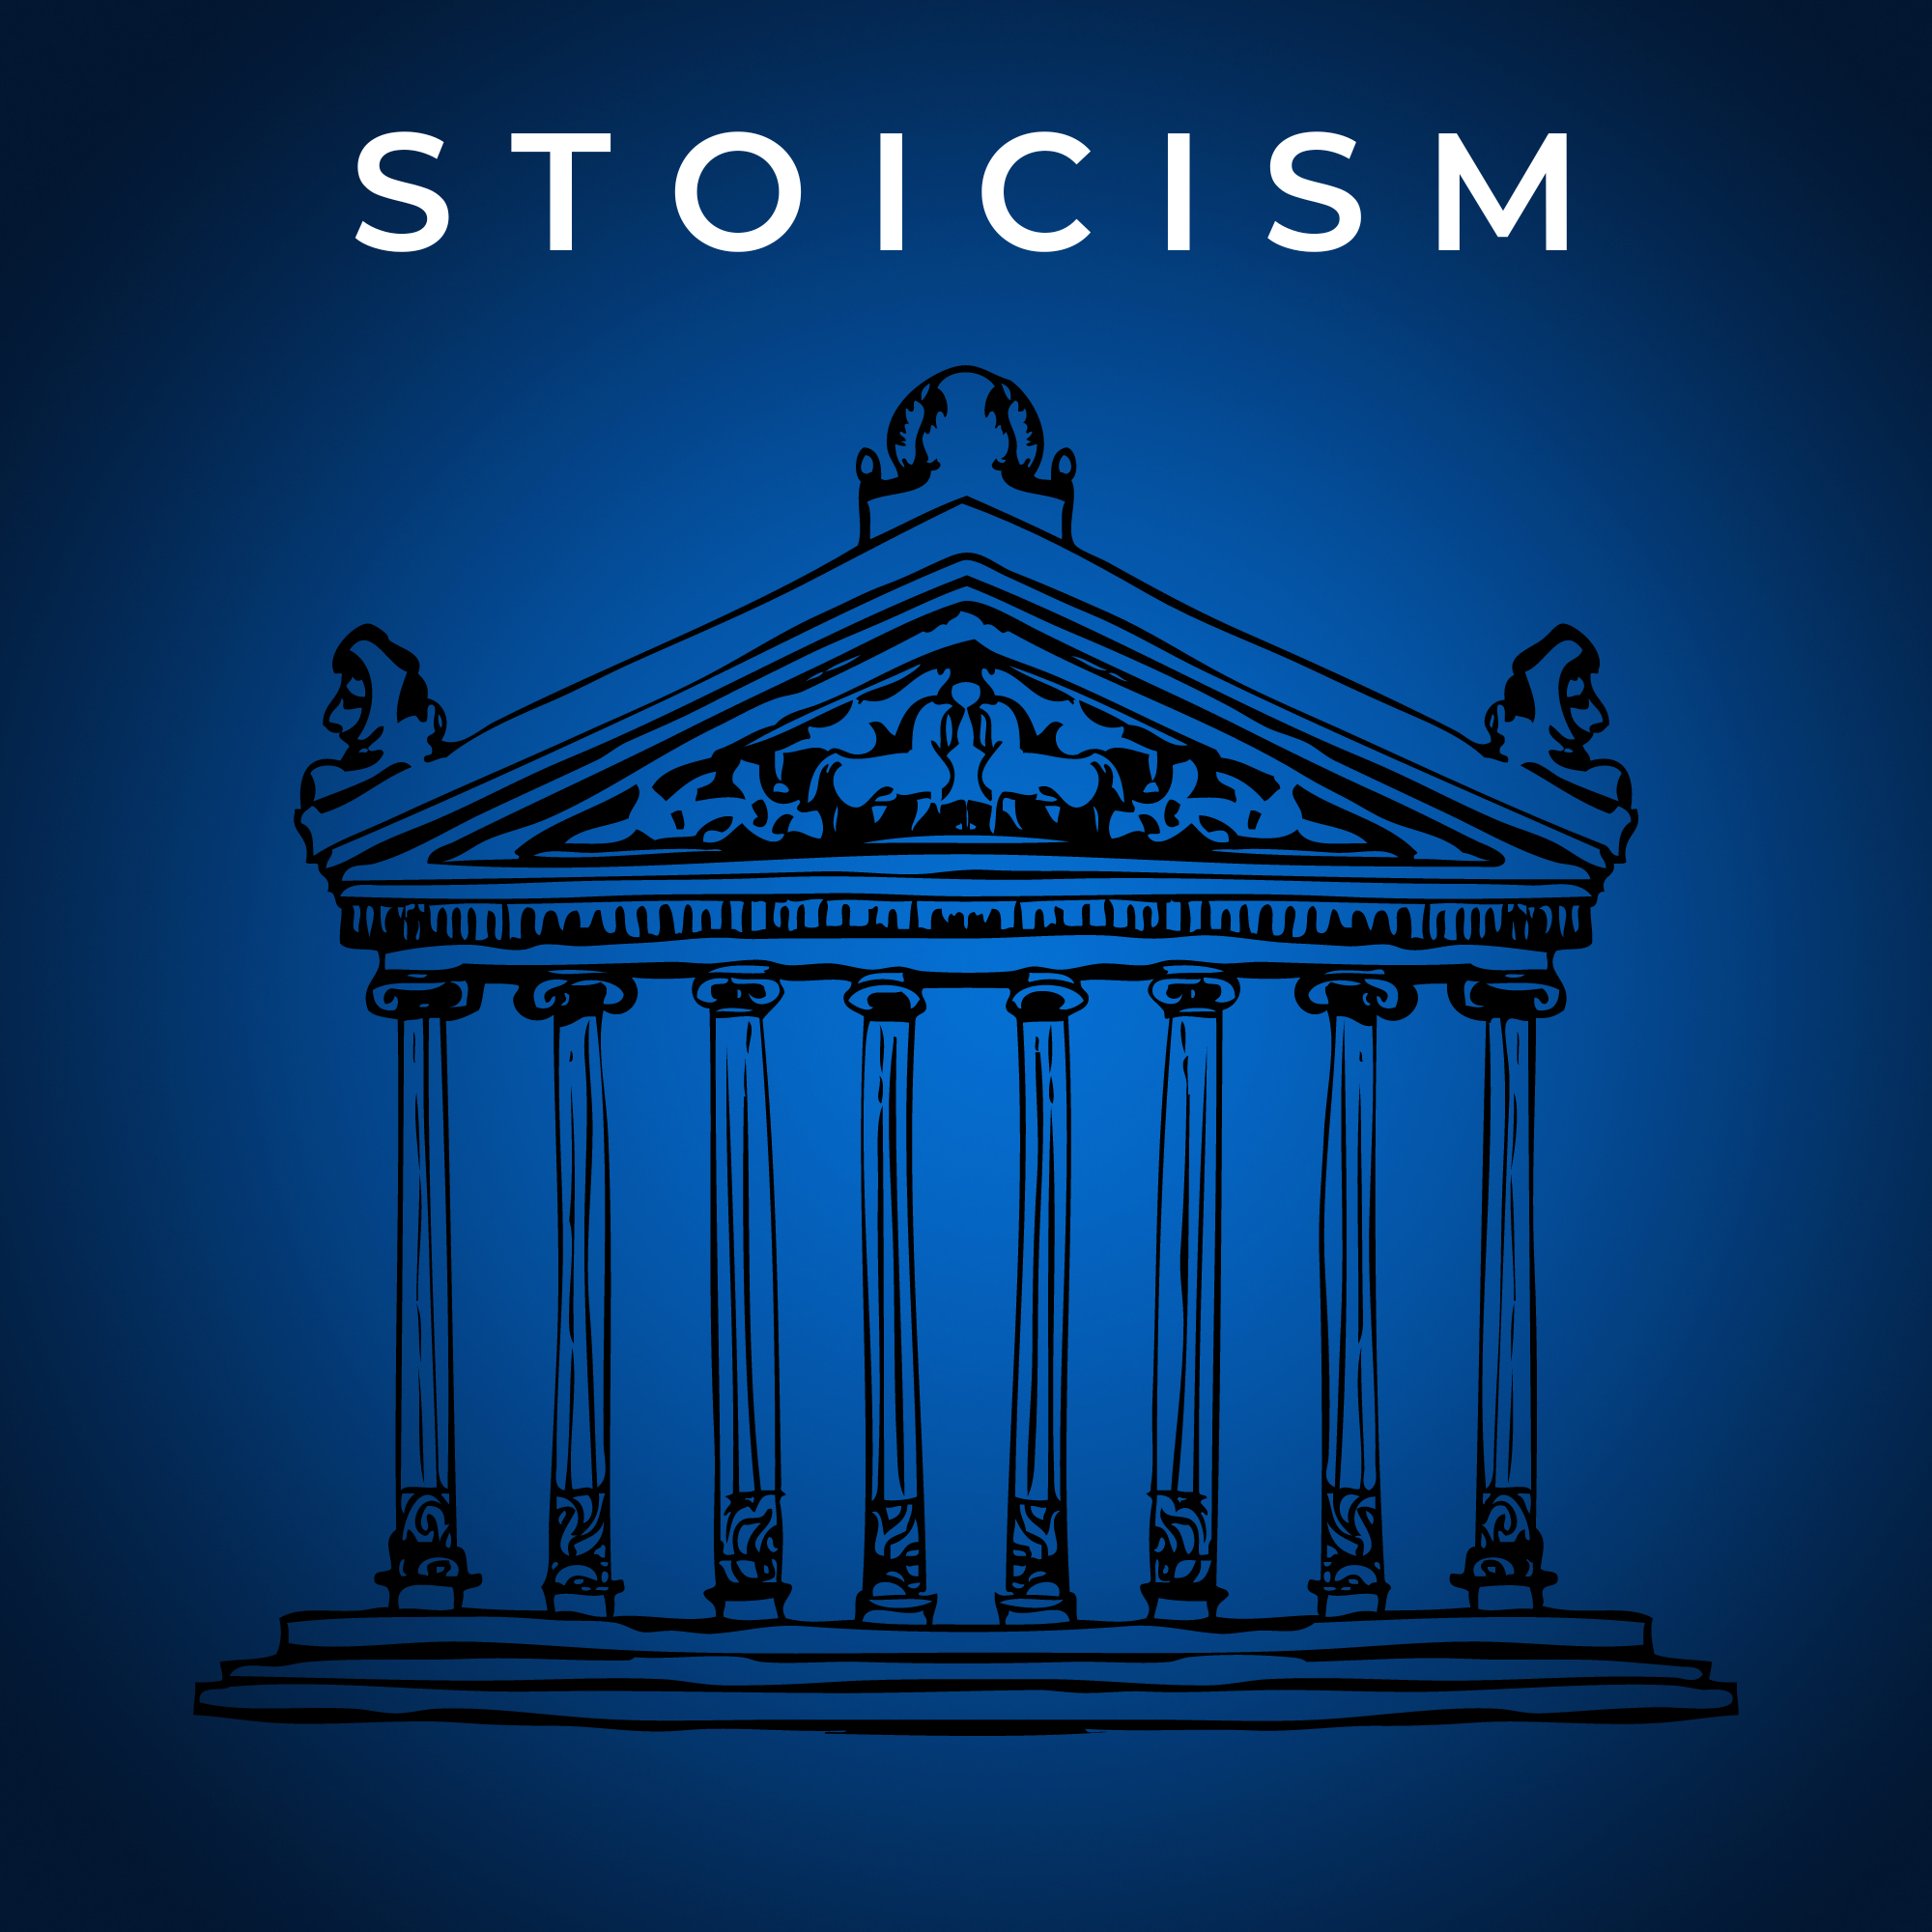 An introduction to stoicism. The Father's of stoicism. What does stoicism teach?